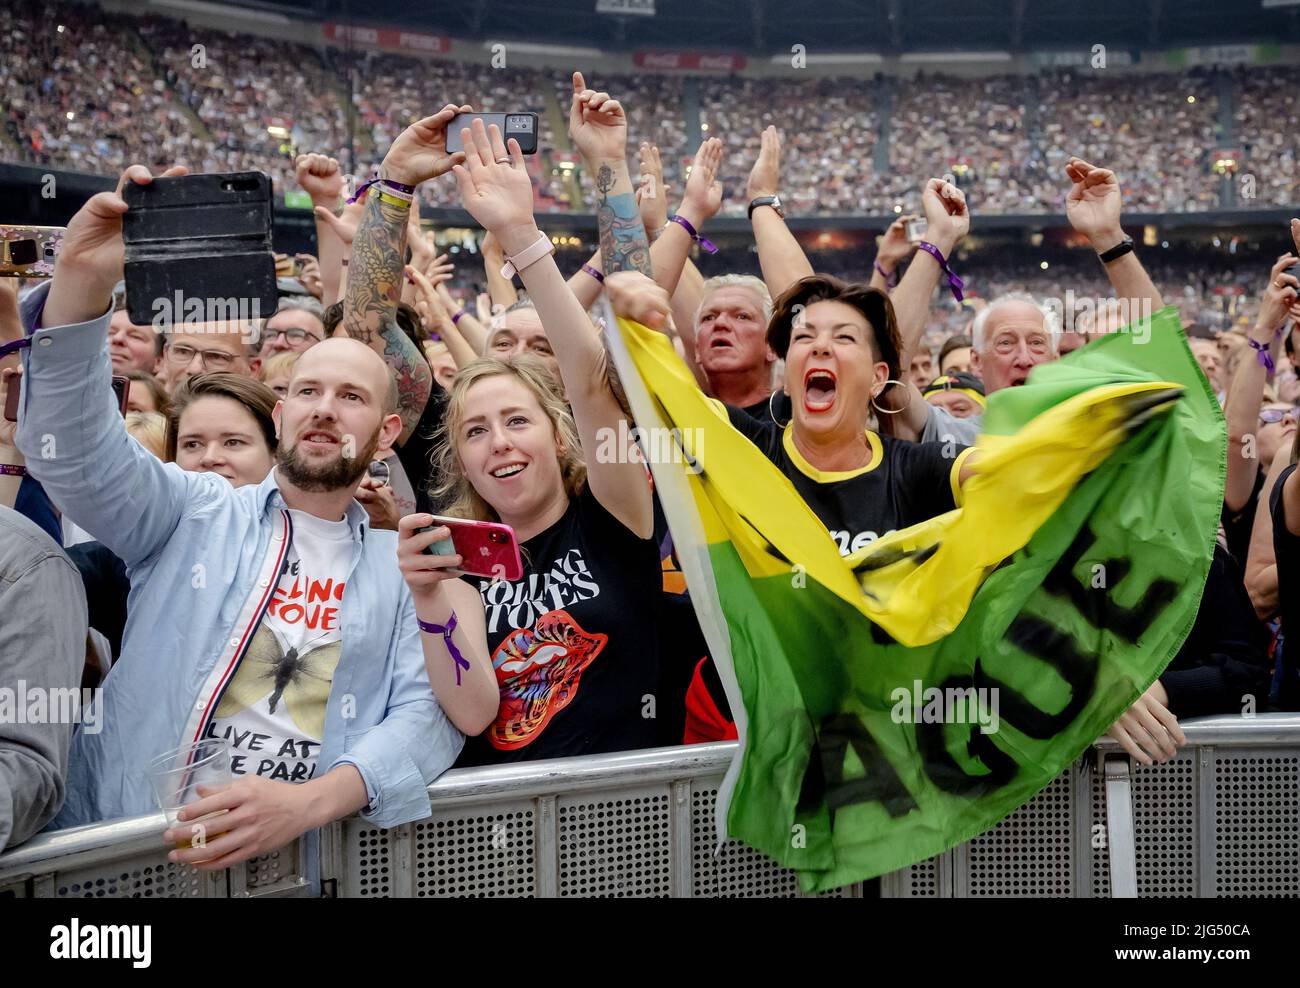 AMSTERDAM - 2022-07-07 20:48:23 AMSTERDAM - Audience during the concert of The Rolling Stones in the Johan Cruijff ArenA. With the SIXTY tour, Mick Jagger, Keith Richards and Ronnie Wood make their long-awaited return. ANP KIPPA ROBIN VAN LONKHUIJSEN netherlands out - belgium out Stock Photo